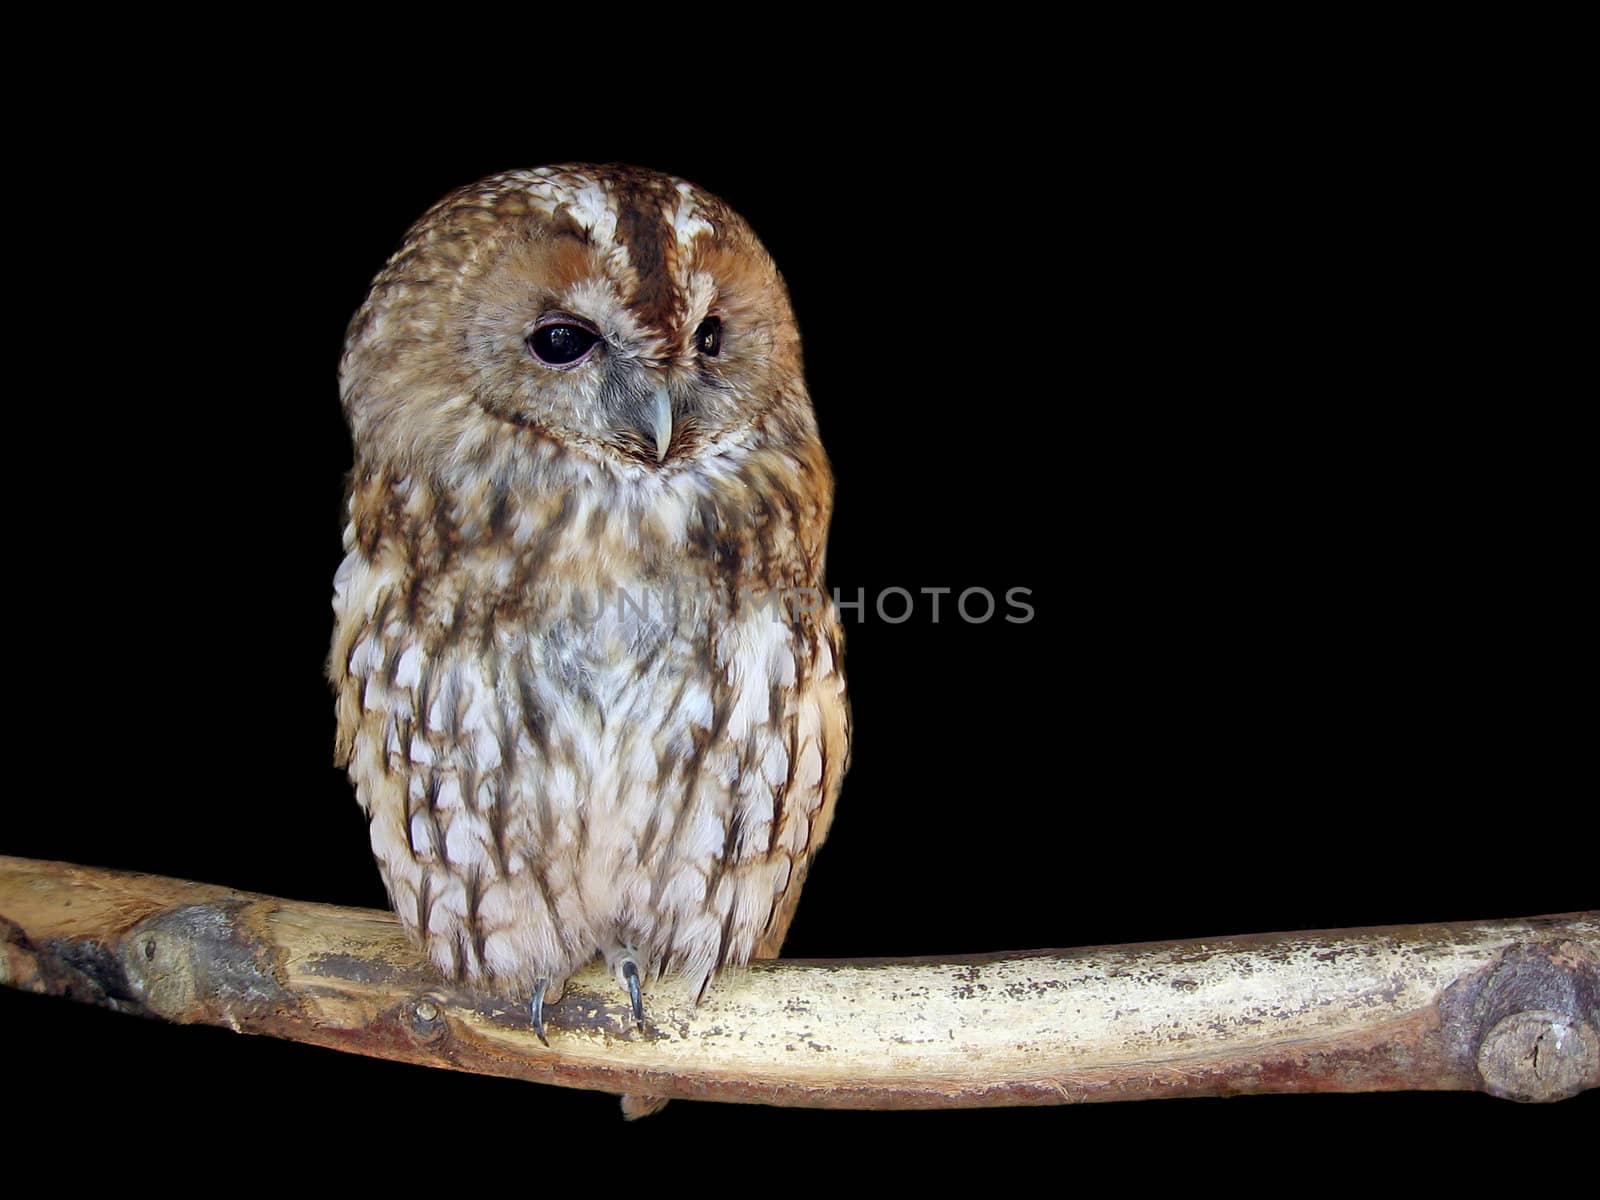 Owl in the night by tomatto